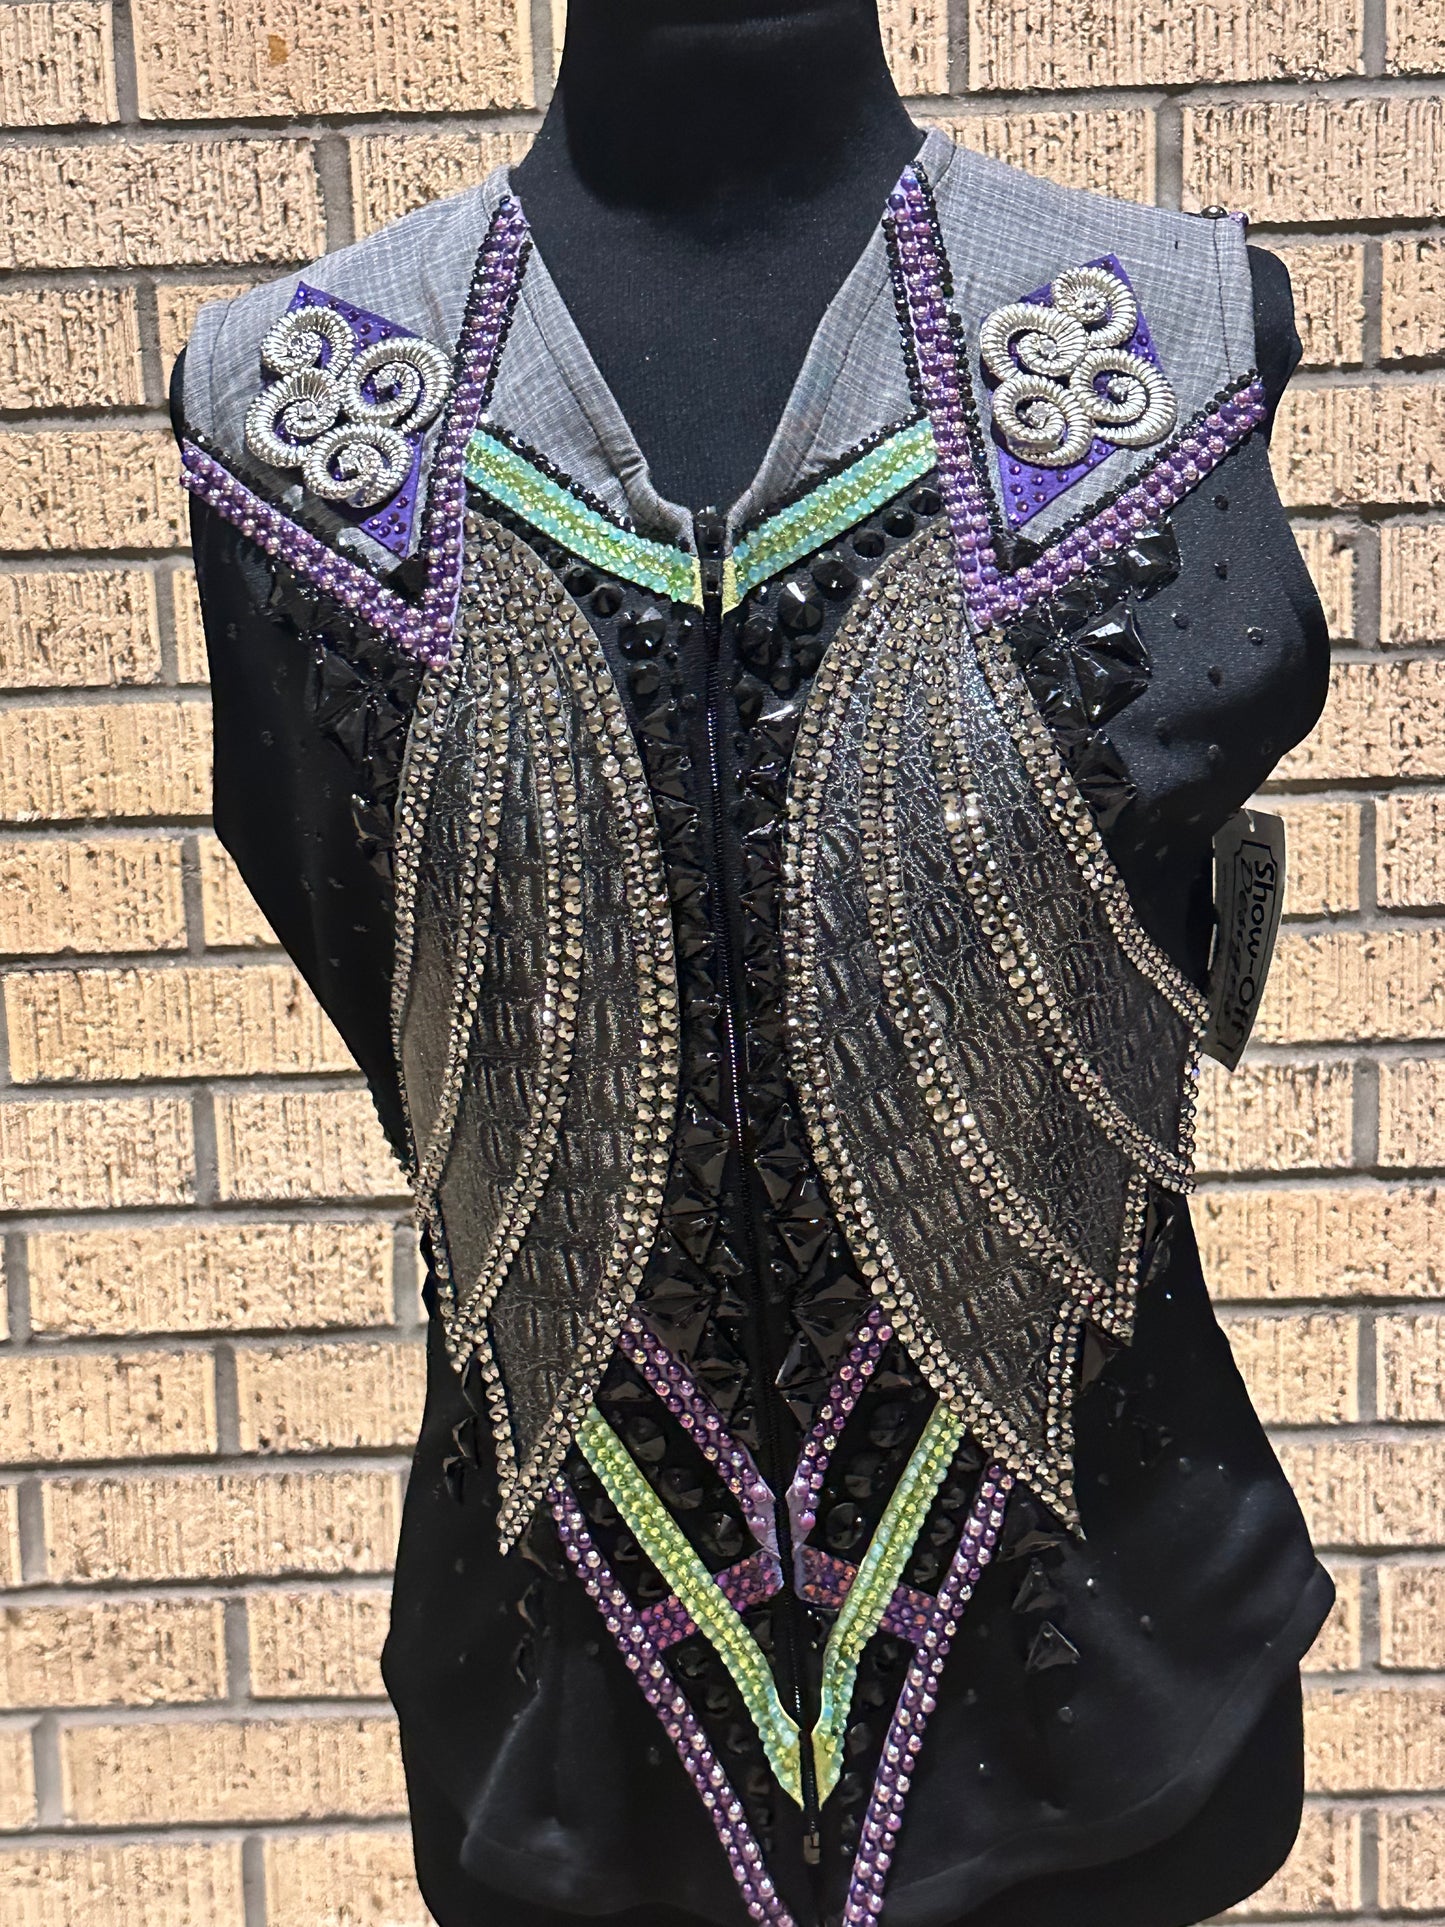 Size medium vest with silver, charcoal grey, purple and a hint of green